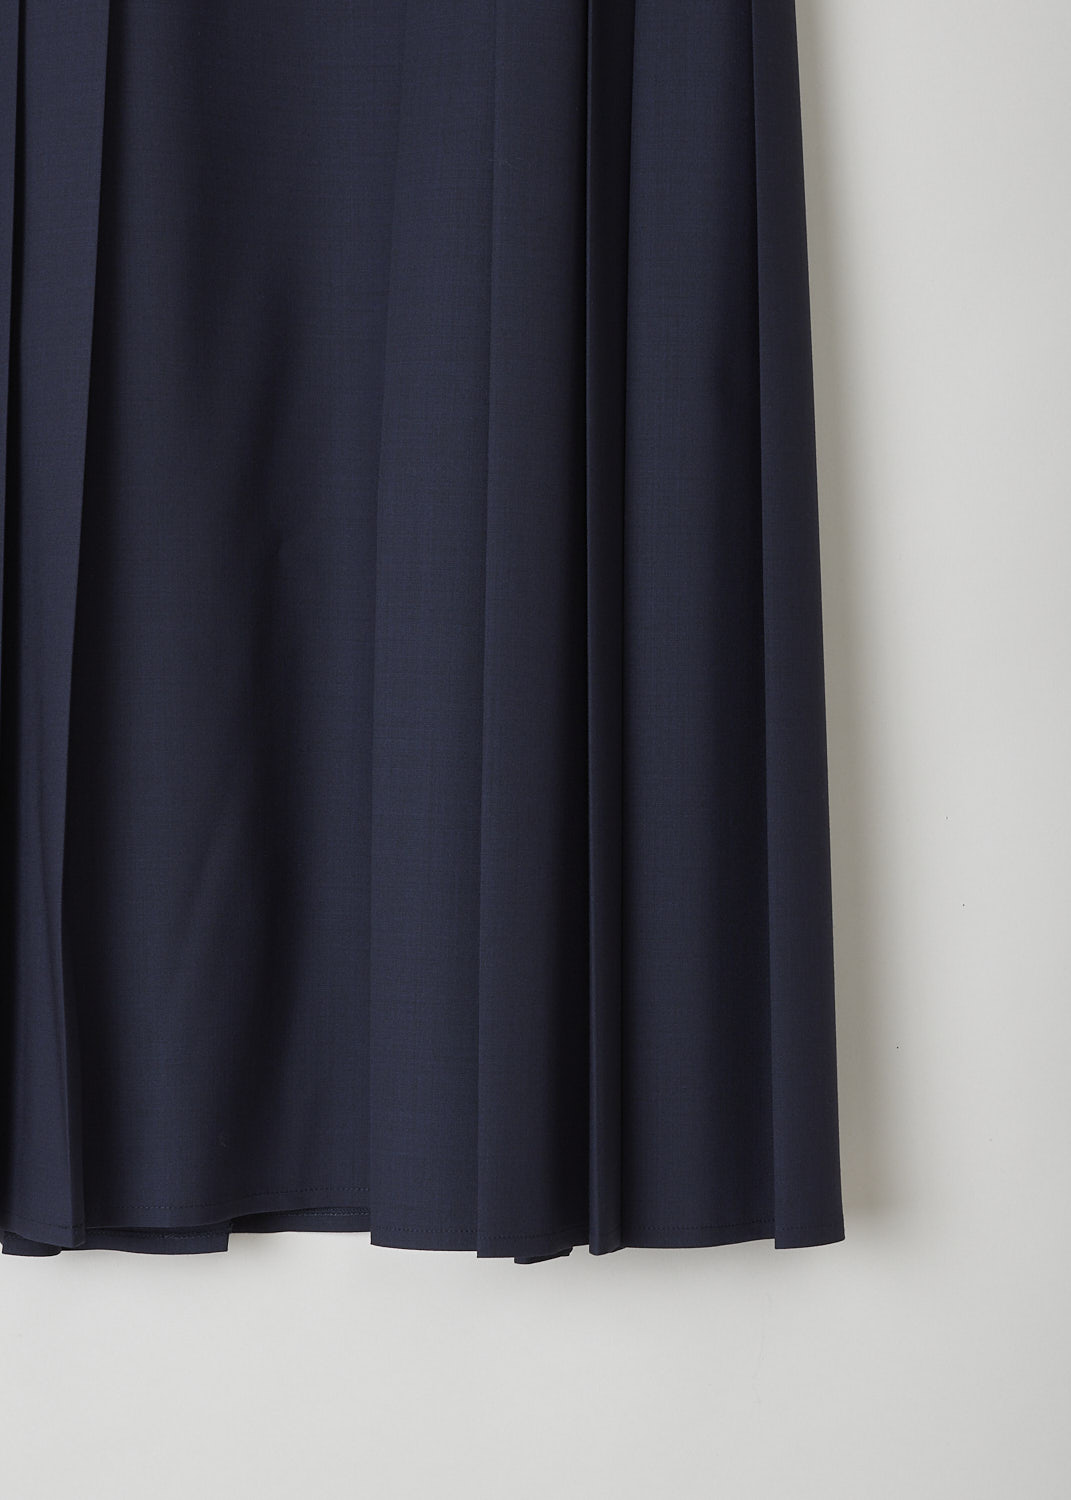 ASPESI, NAVY BLUE PLEATED MIDI SKIRT, 2207_G286_01098, Blue, Detail, This navy blue wool-blend midi skirt has a broad waistband and pleats along the sides. The skirt has a straight hemline. A concealed zipper in the side seam functions as the closure option. 
